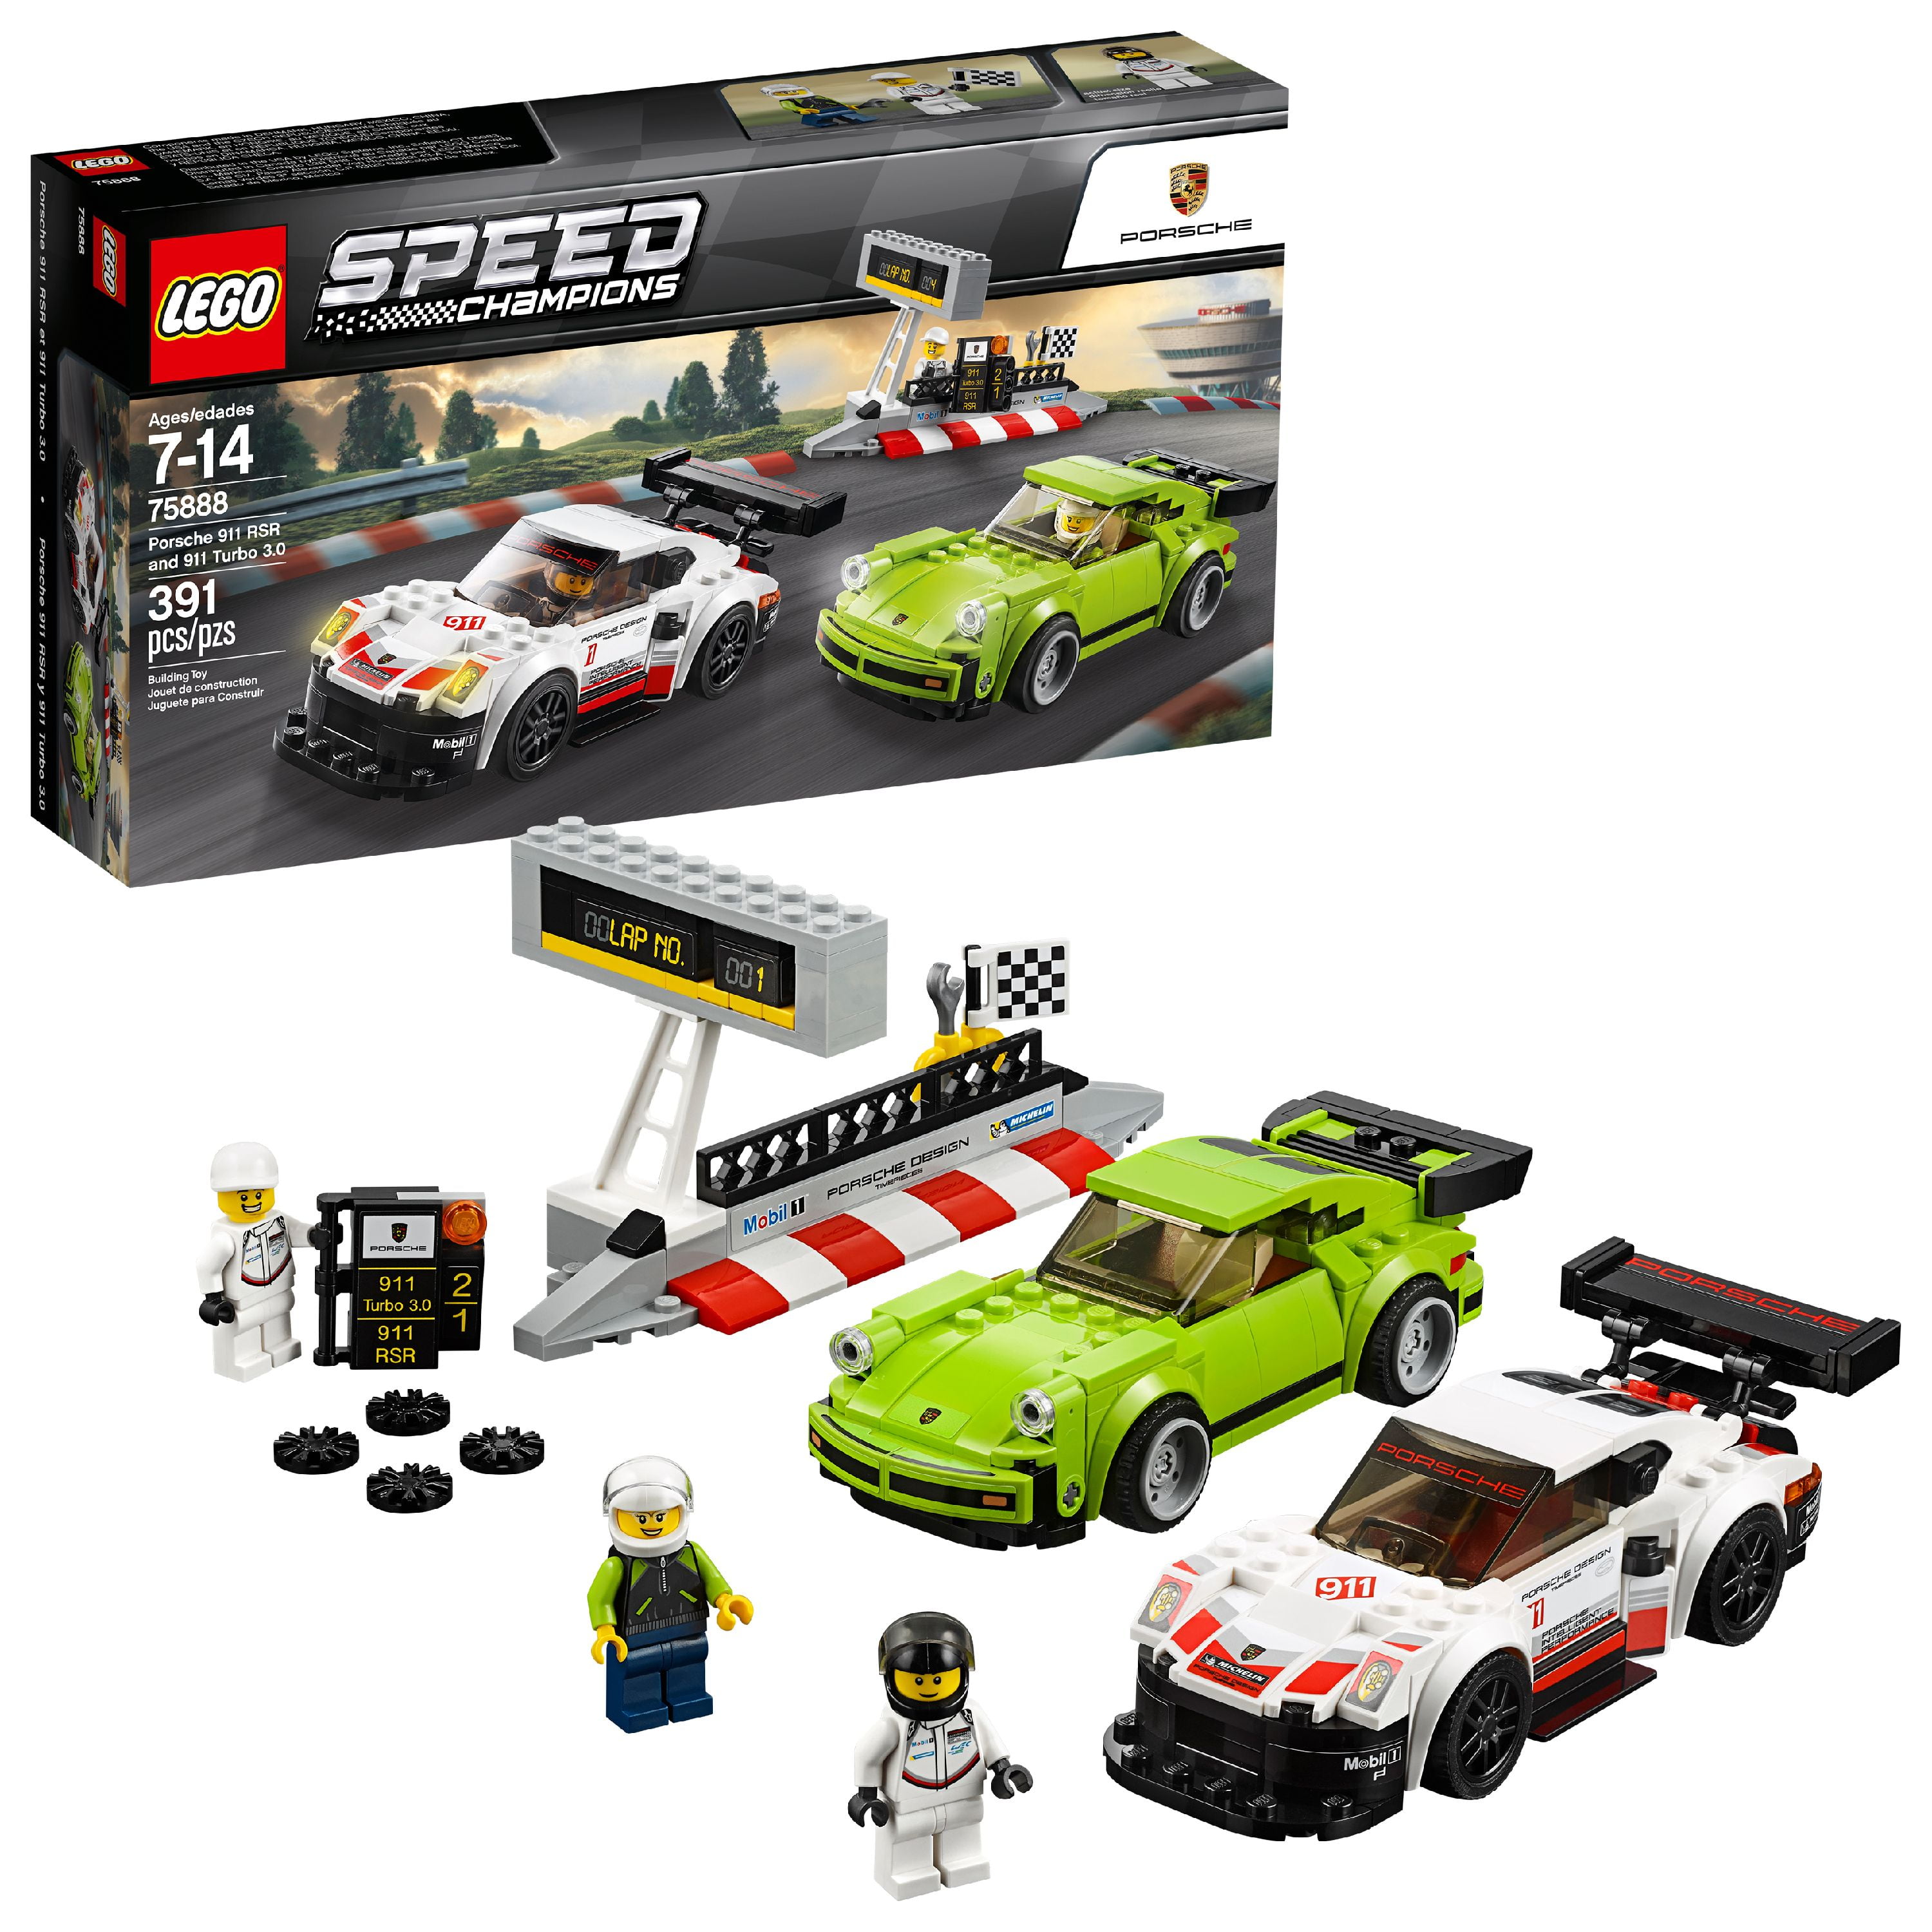 LEGO 75888 Porsche 911 RSR and 911 Turbo 3.0 for sale online